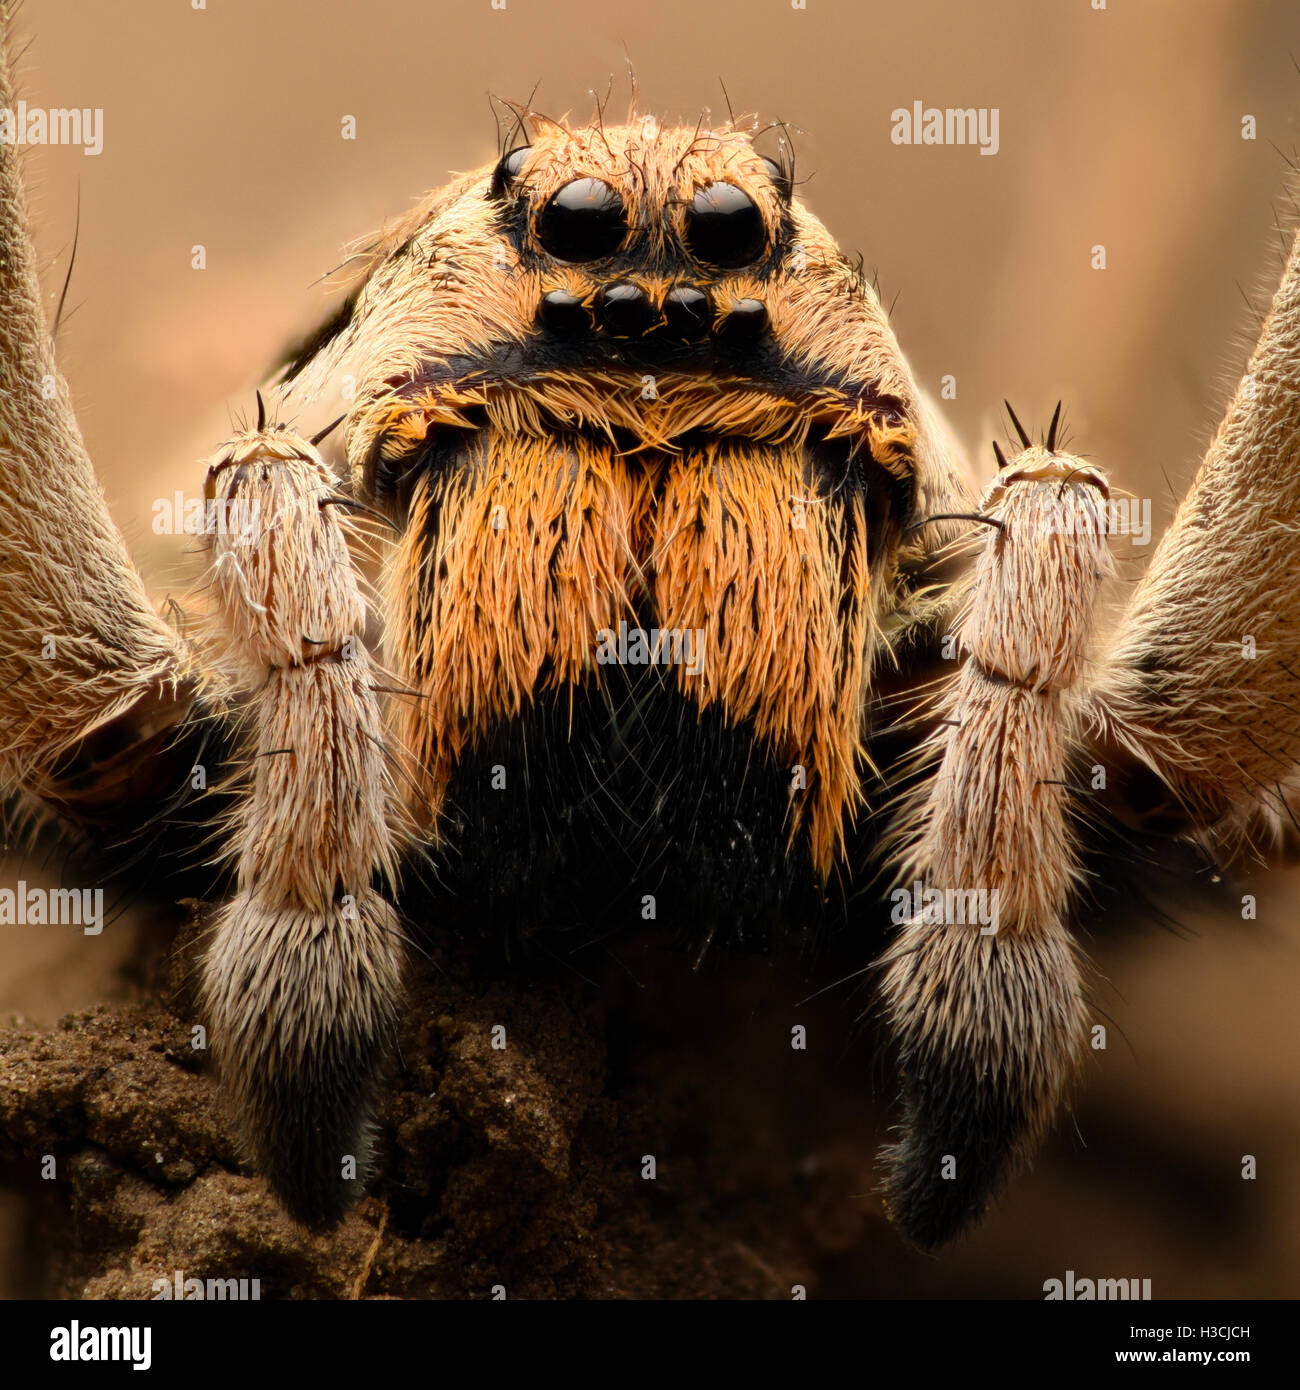 Extreme magnification - Wolf Spider front view Stock Photo